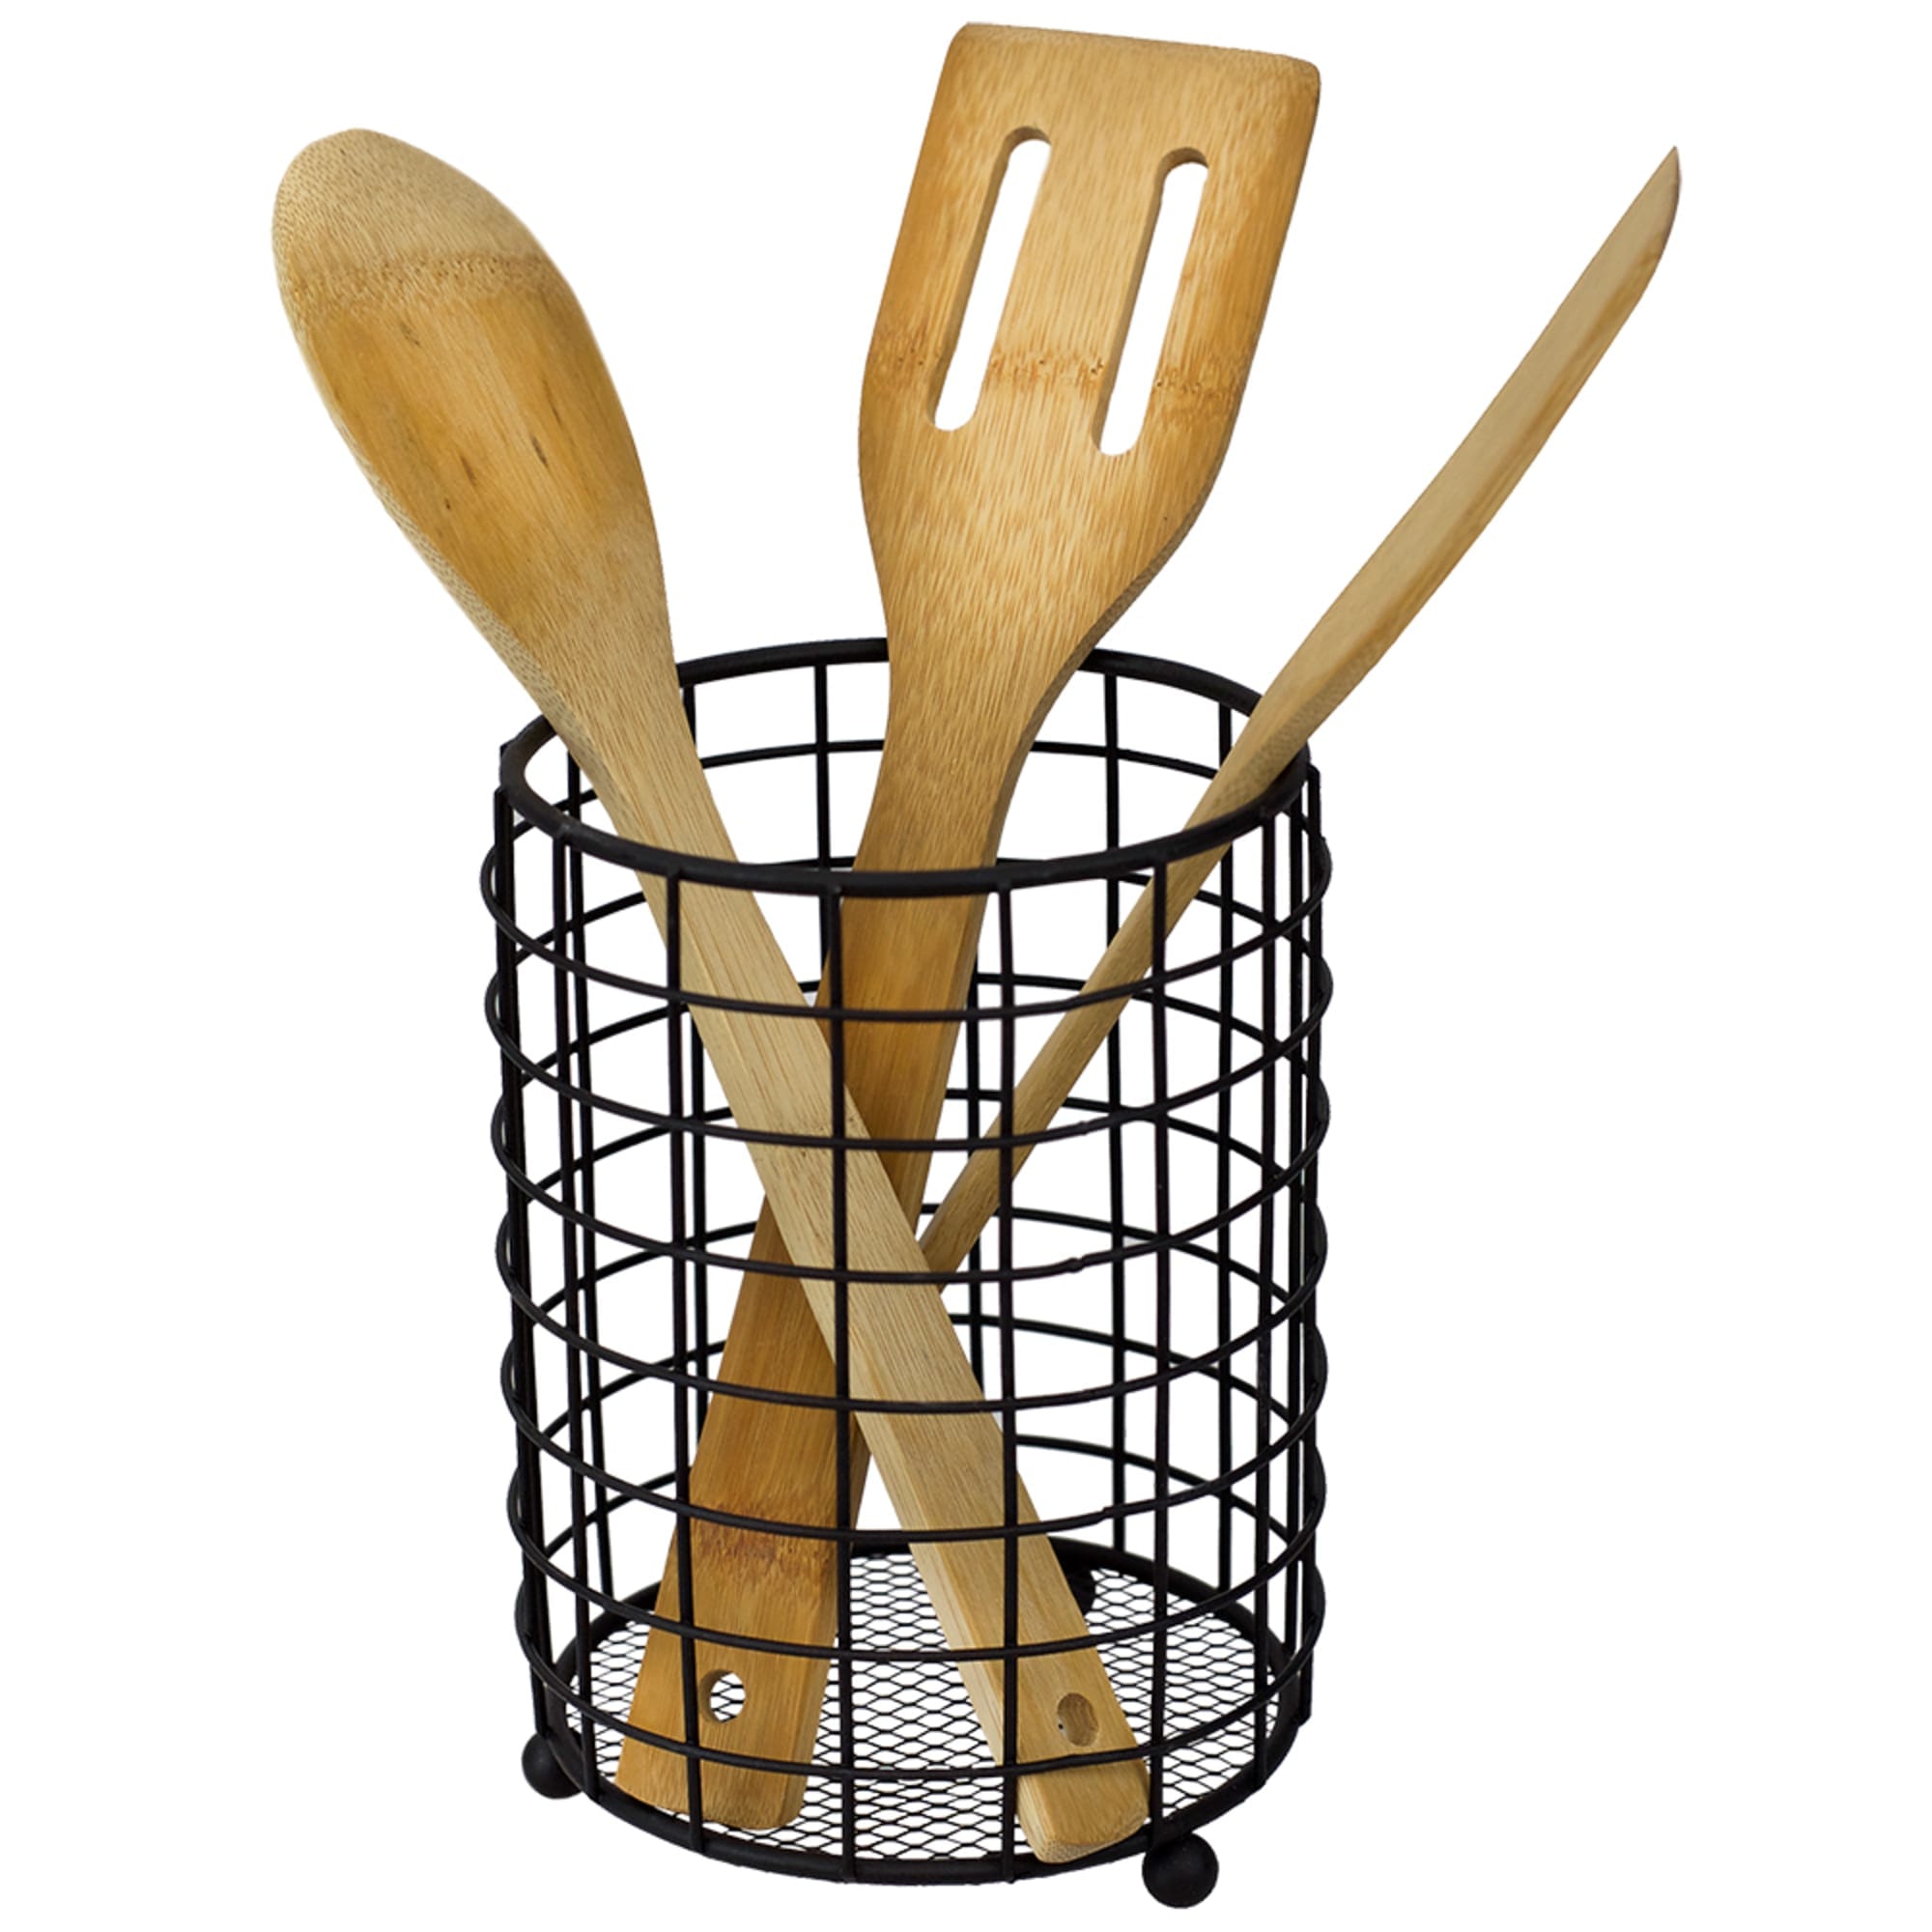 Home Basics Grid Free-Standing Cutlery Holder with Mesh Bottom, Black $4.00 EACH, CASE PACK OF 12